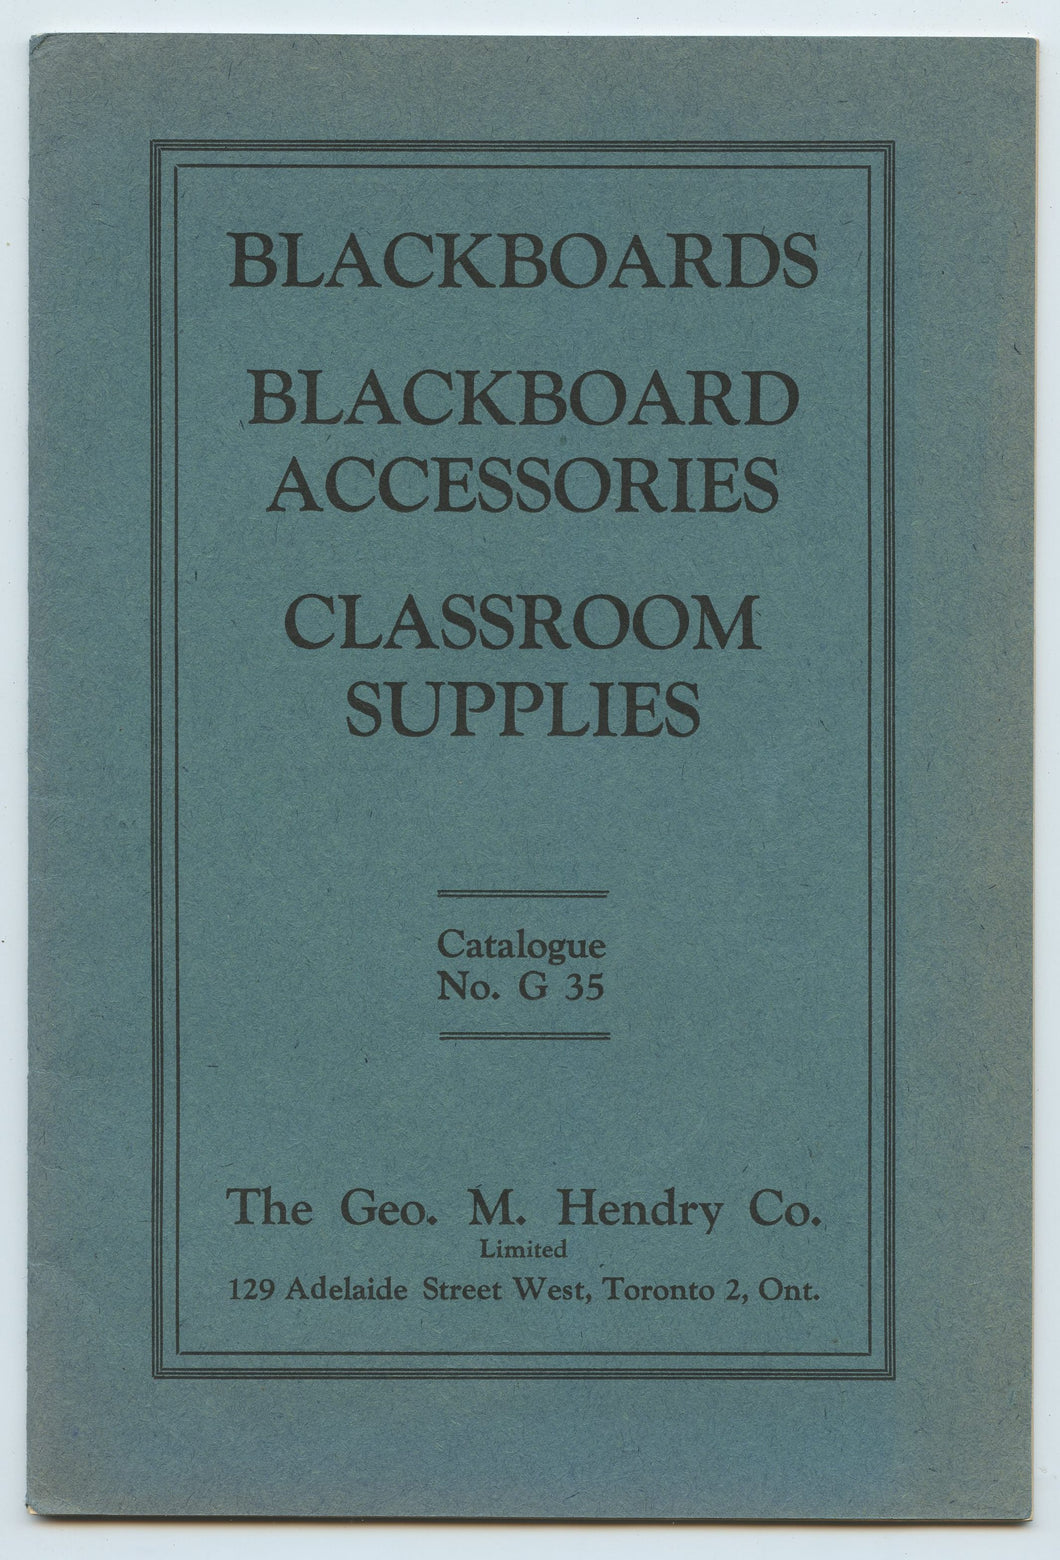 The Geo. M. Hendry Co. classroom supplies catalogue